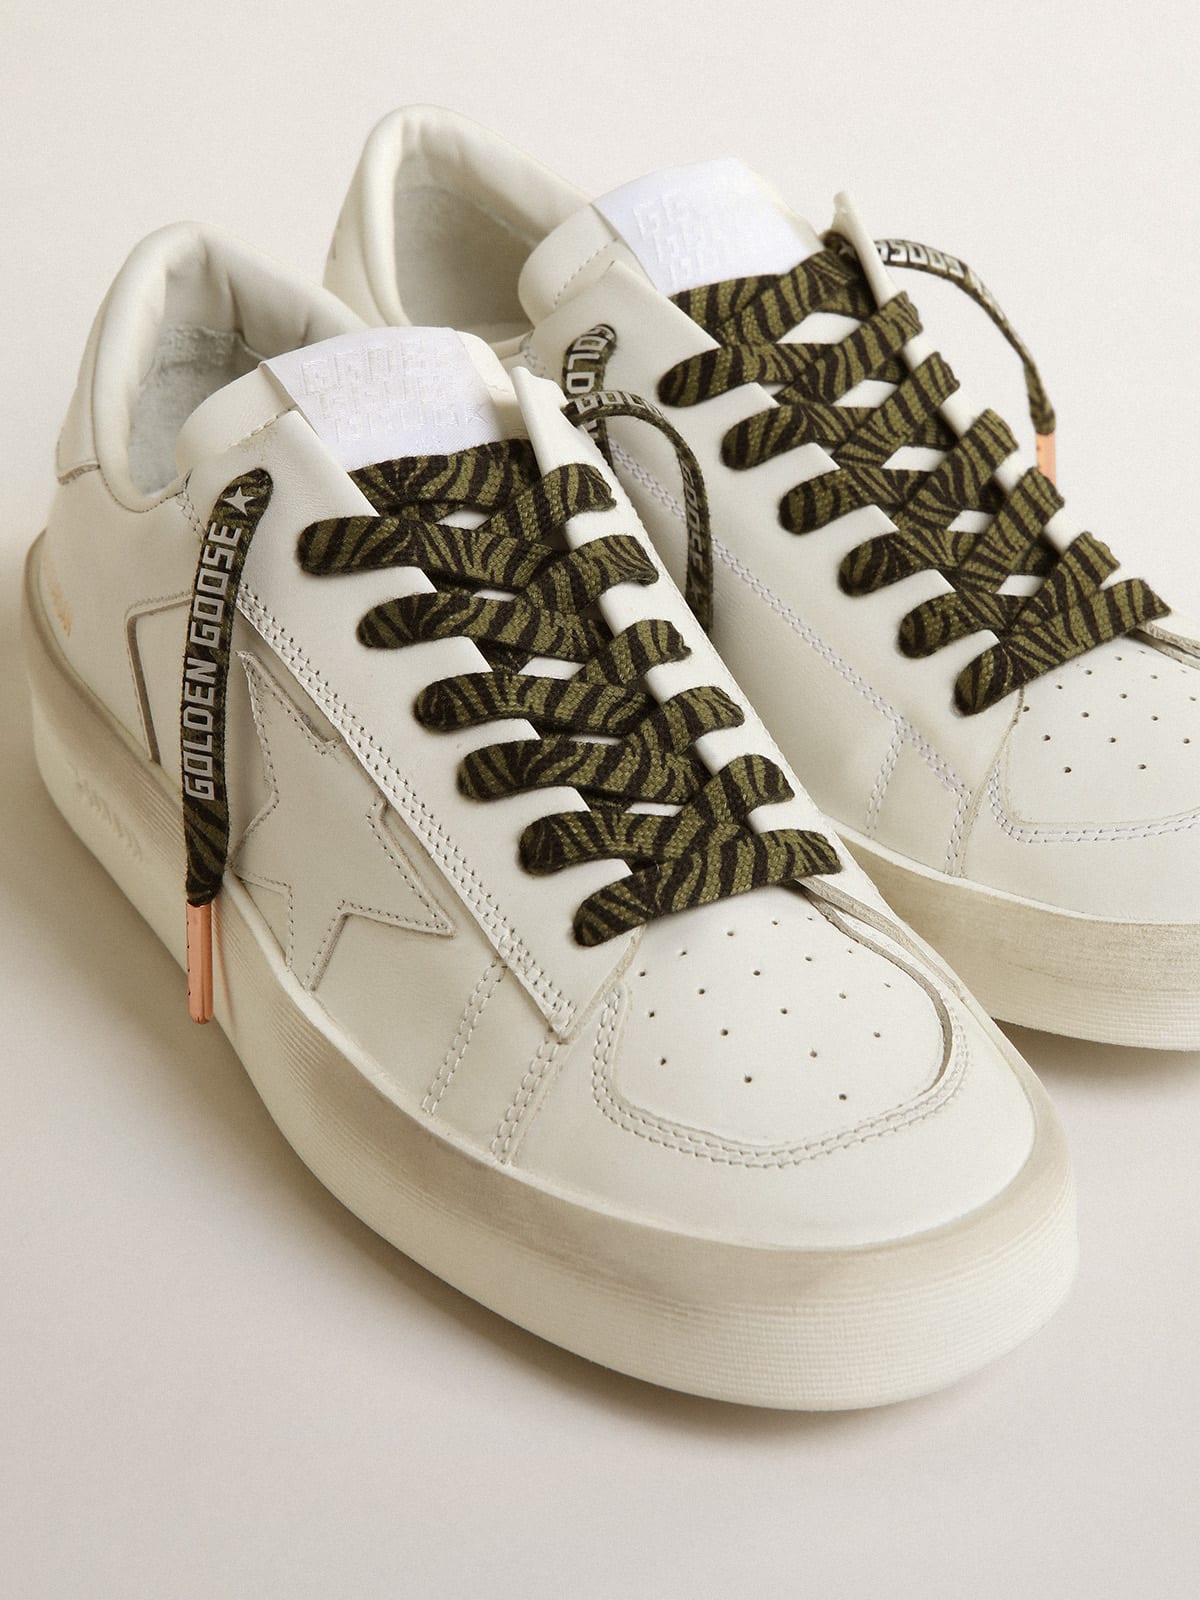 Golden Goose - Green and black zebra-print laces with contrasting silver-colored logo in 